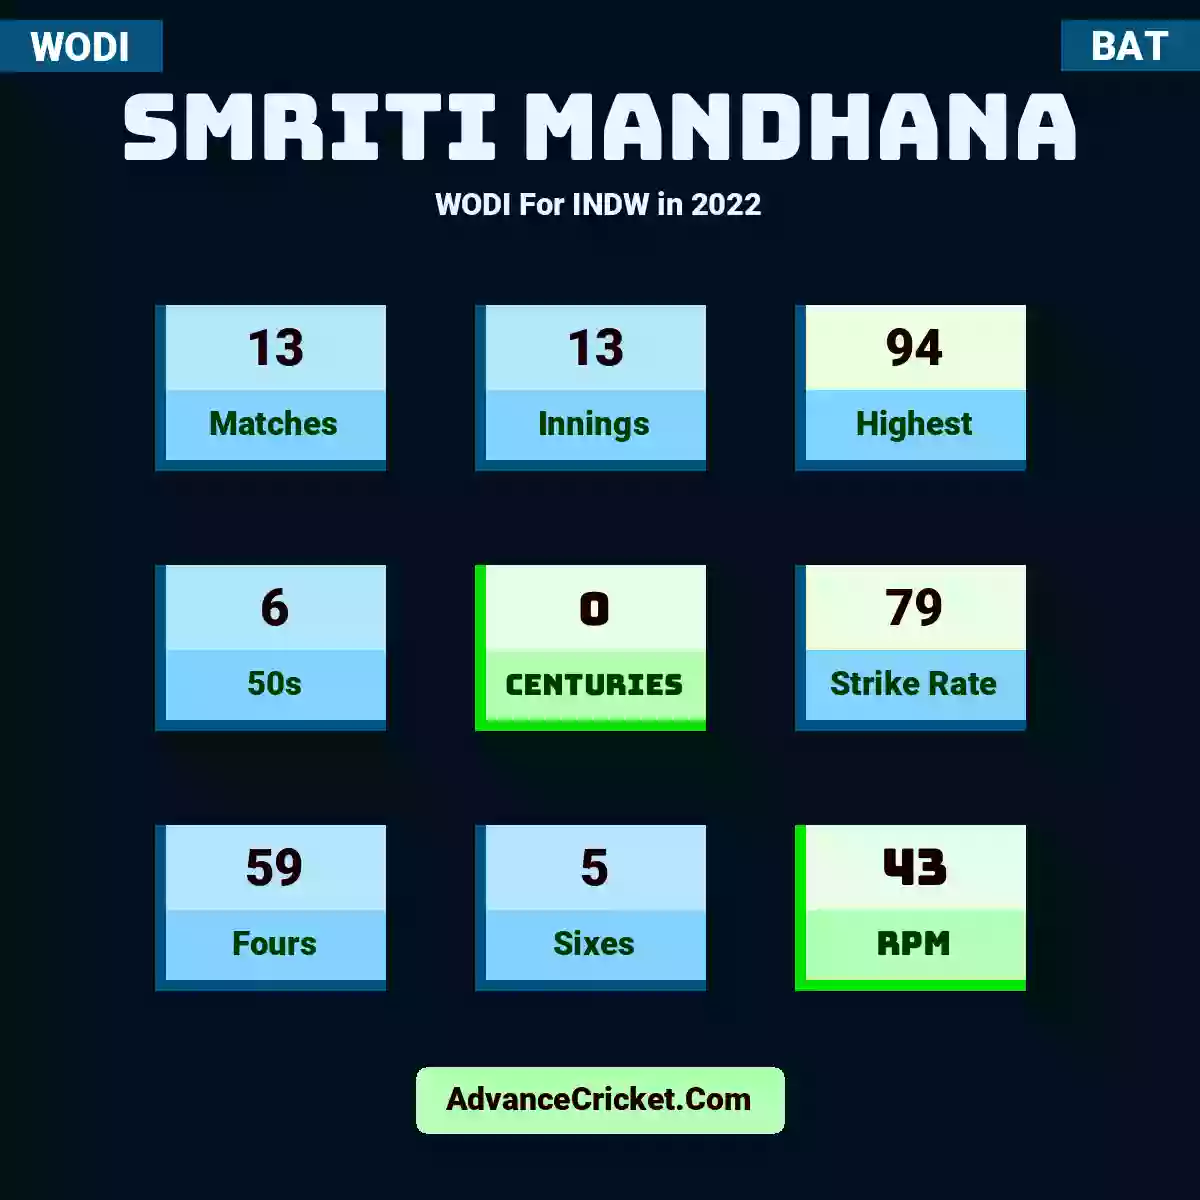 Smriti Mandhana WODI  For INDW in 2022, Smriti Mandhana played 13 matches, scored 94 runs as highest, 6 half-centuries, and 0 centuries, with a strike rate of 79. S.Mandhana hit 59 fours and 5 sixes, with an RPM of 43.